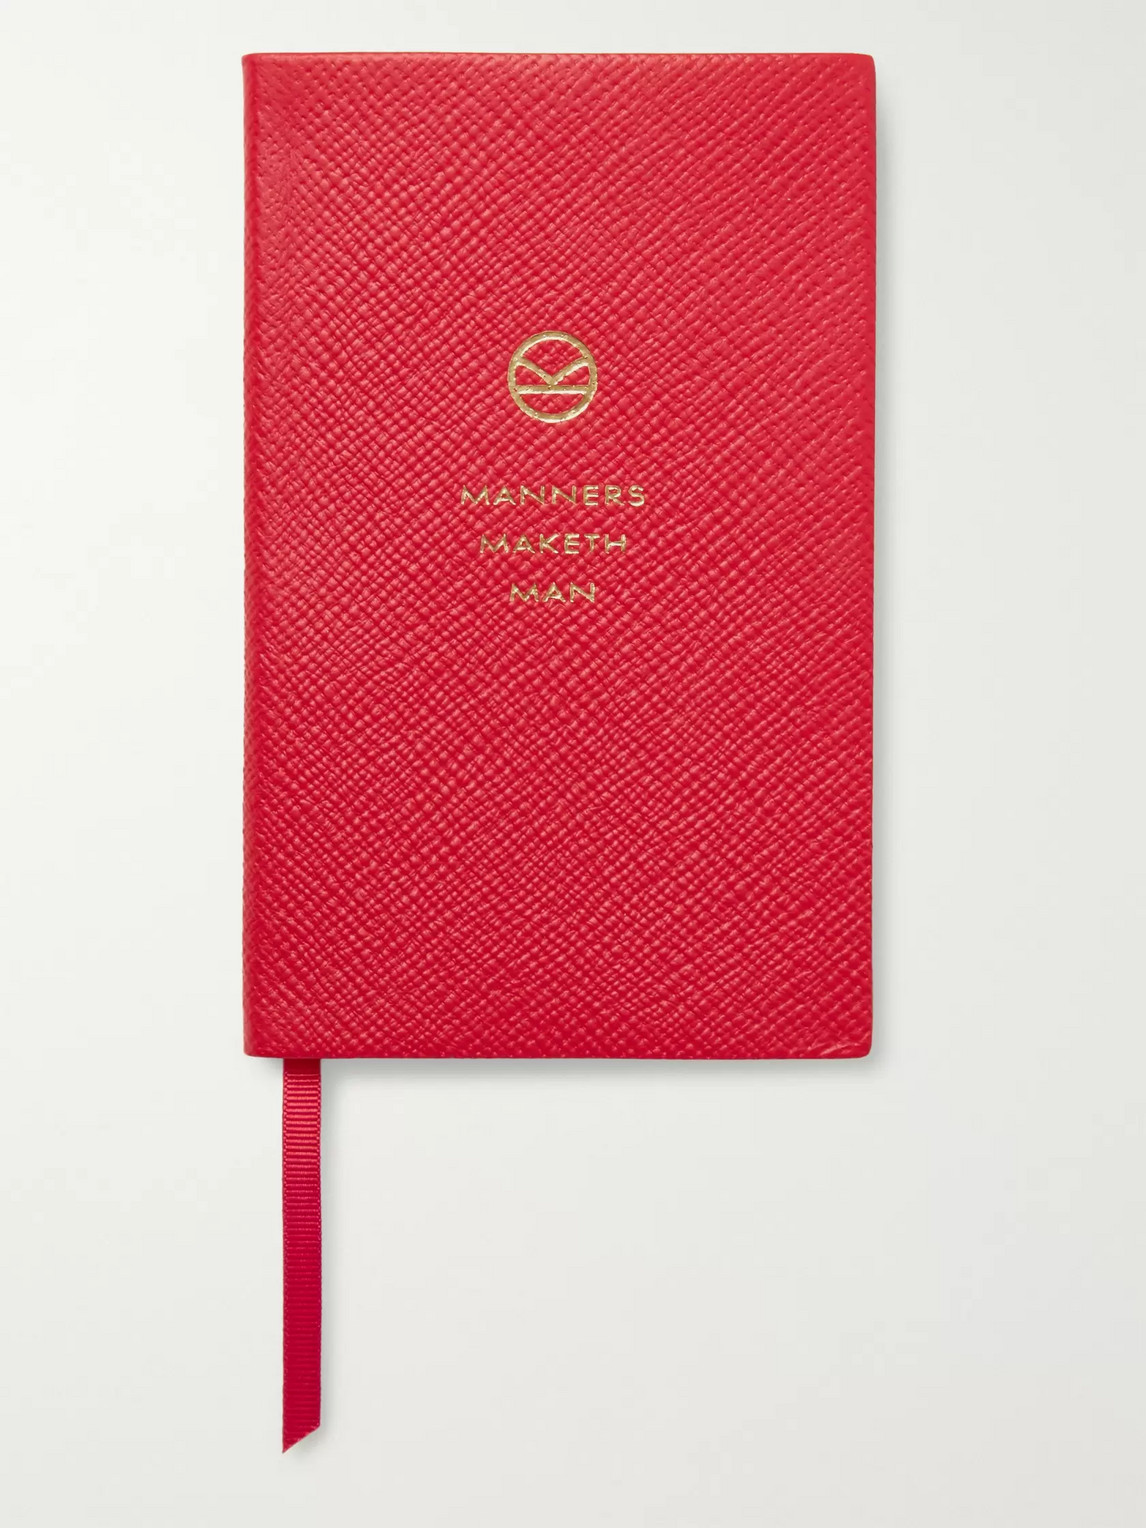 Kingsman Smythson Panama Manners Maketh Man Cross-grain Leather Notebook In Red